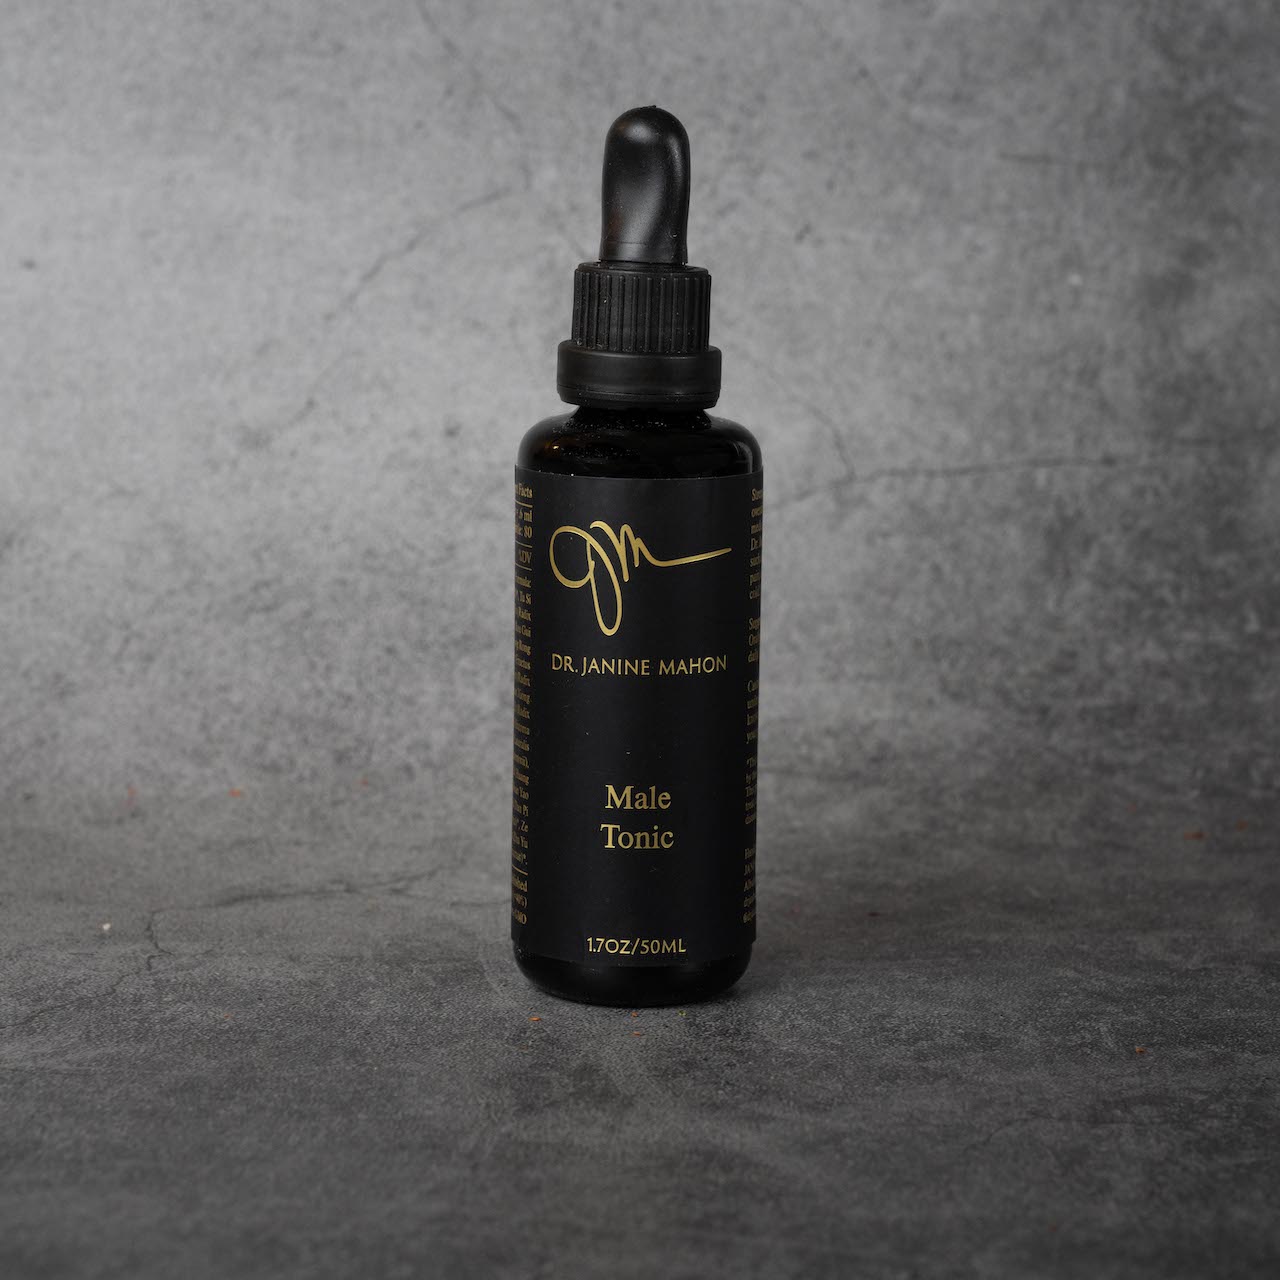 A small black bottle with gold lettering reading "Dr. Janine Mahon" in small print. Below, in slightly larger print, "Male Tonic, 1.7oz/50ML". The bottle has a twist-off lid and a silicone dropper.